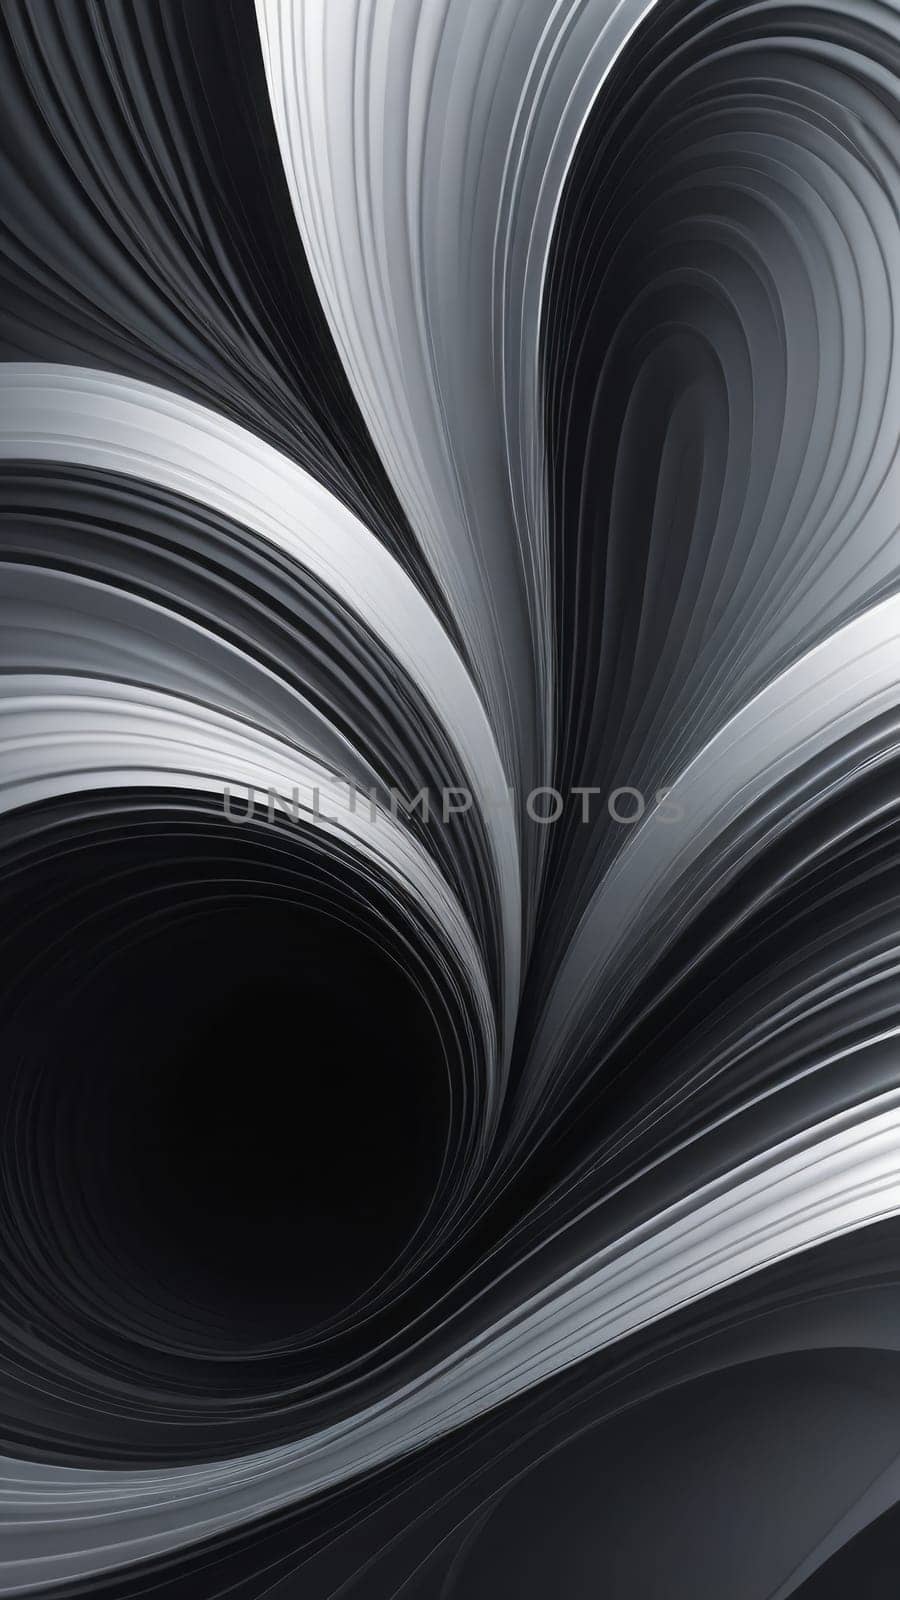 Screen background from Vortex shapes and silver by nkotlyar